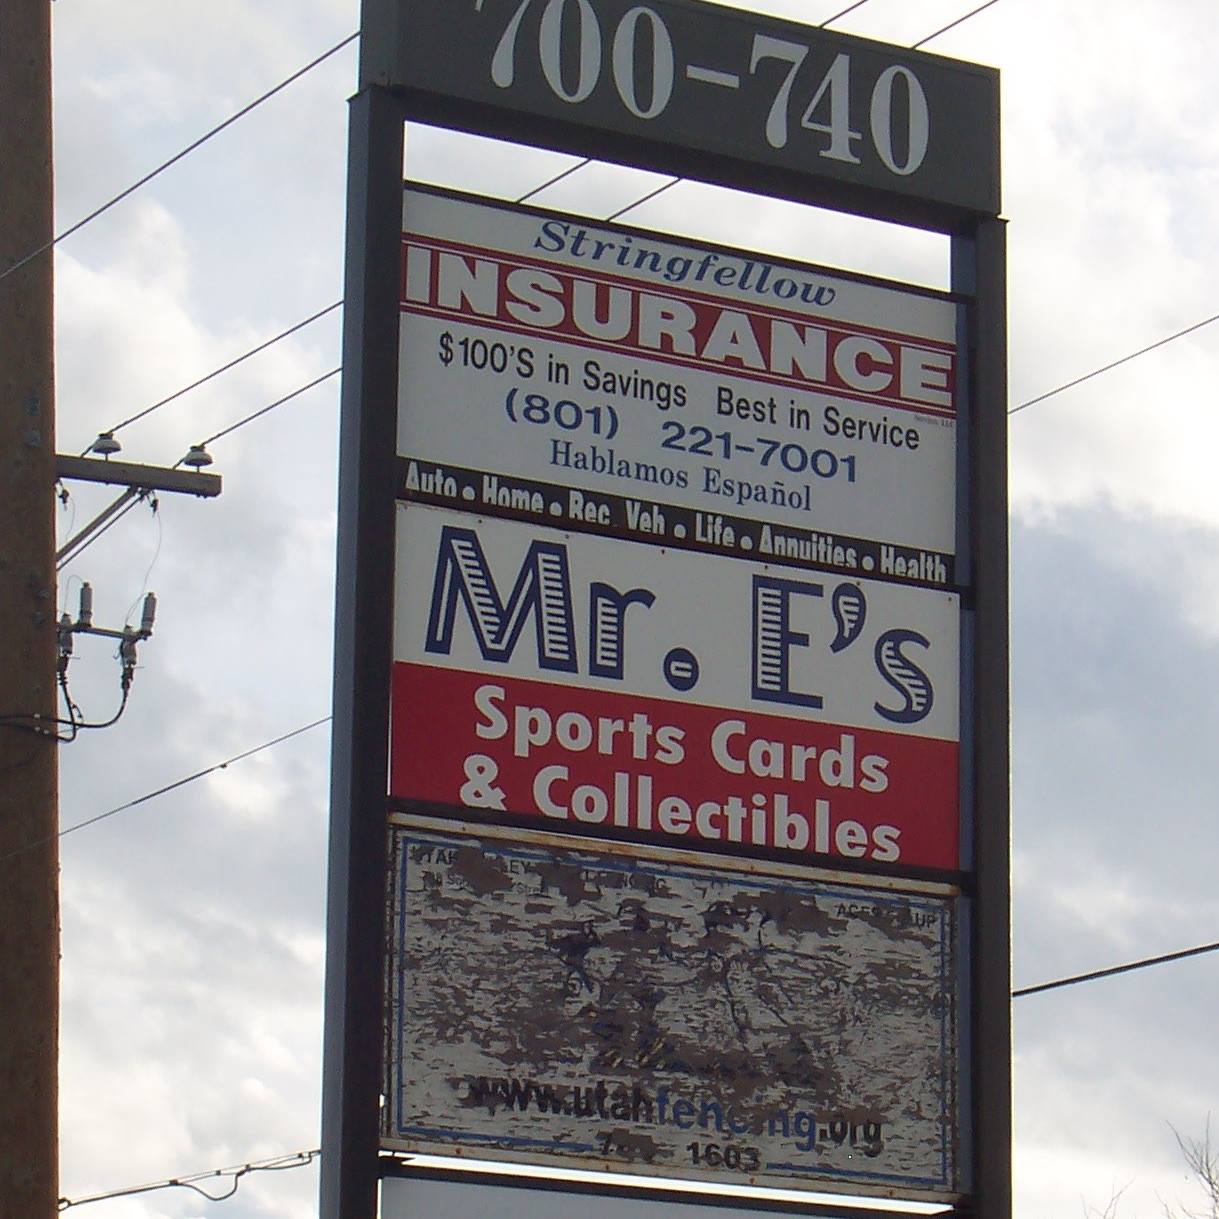 Mr. E's Sportscards & Collectibles